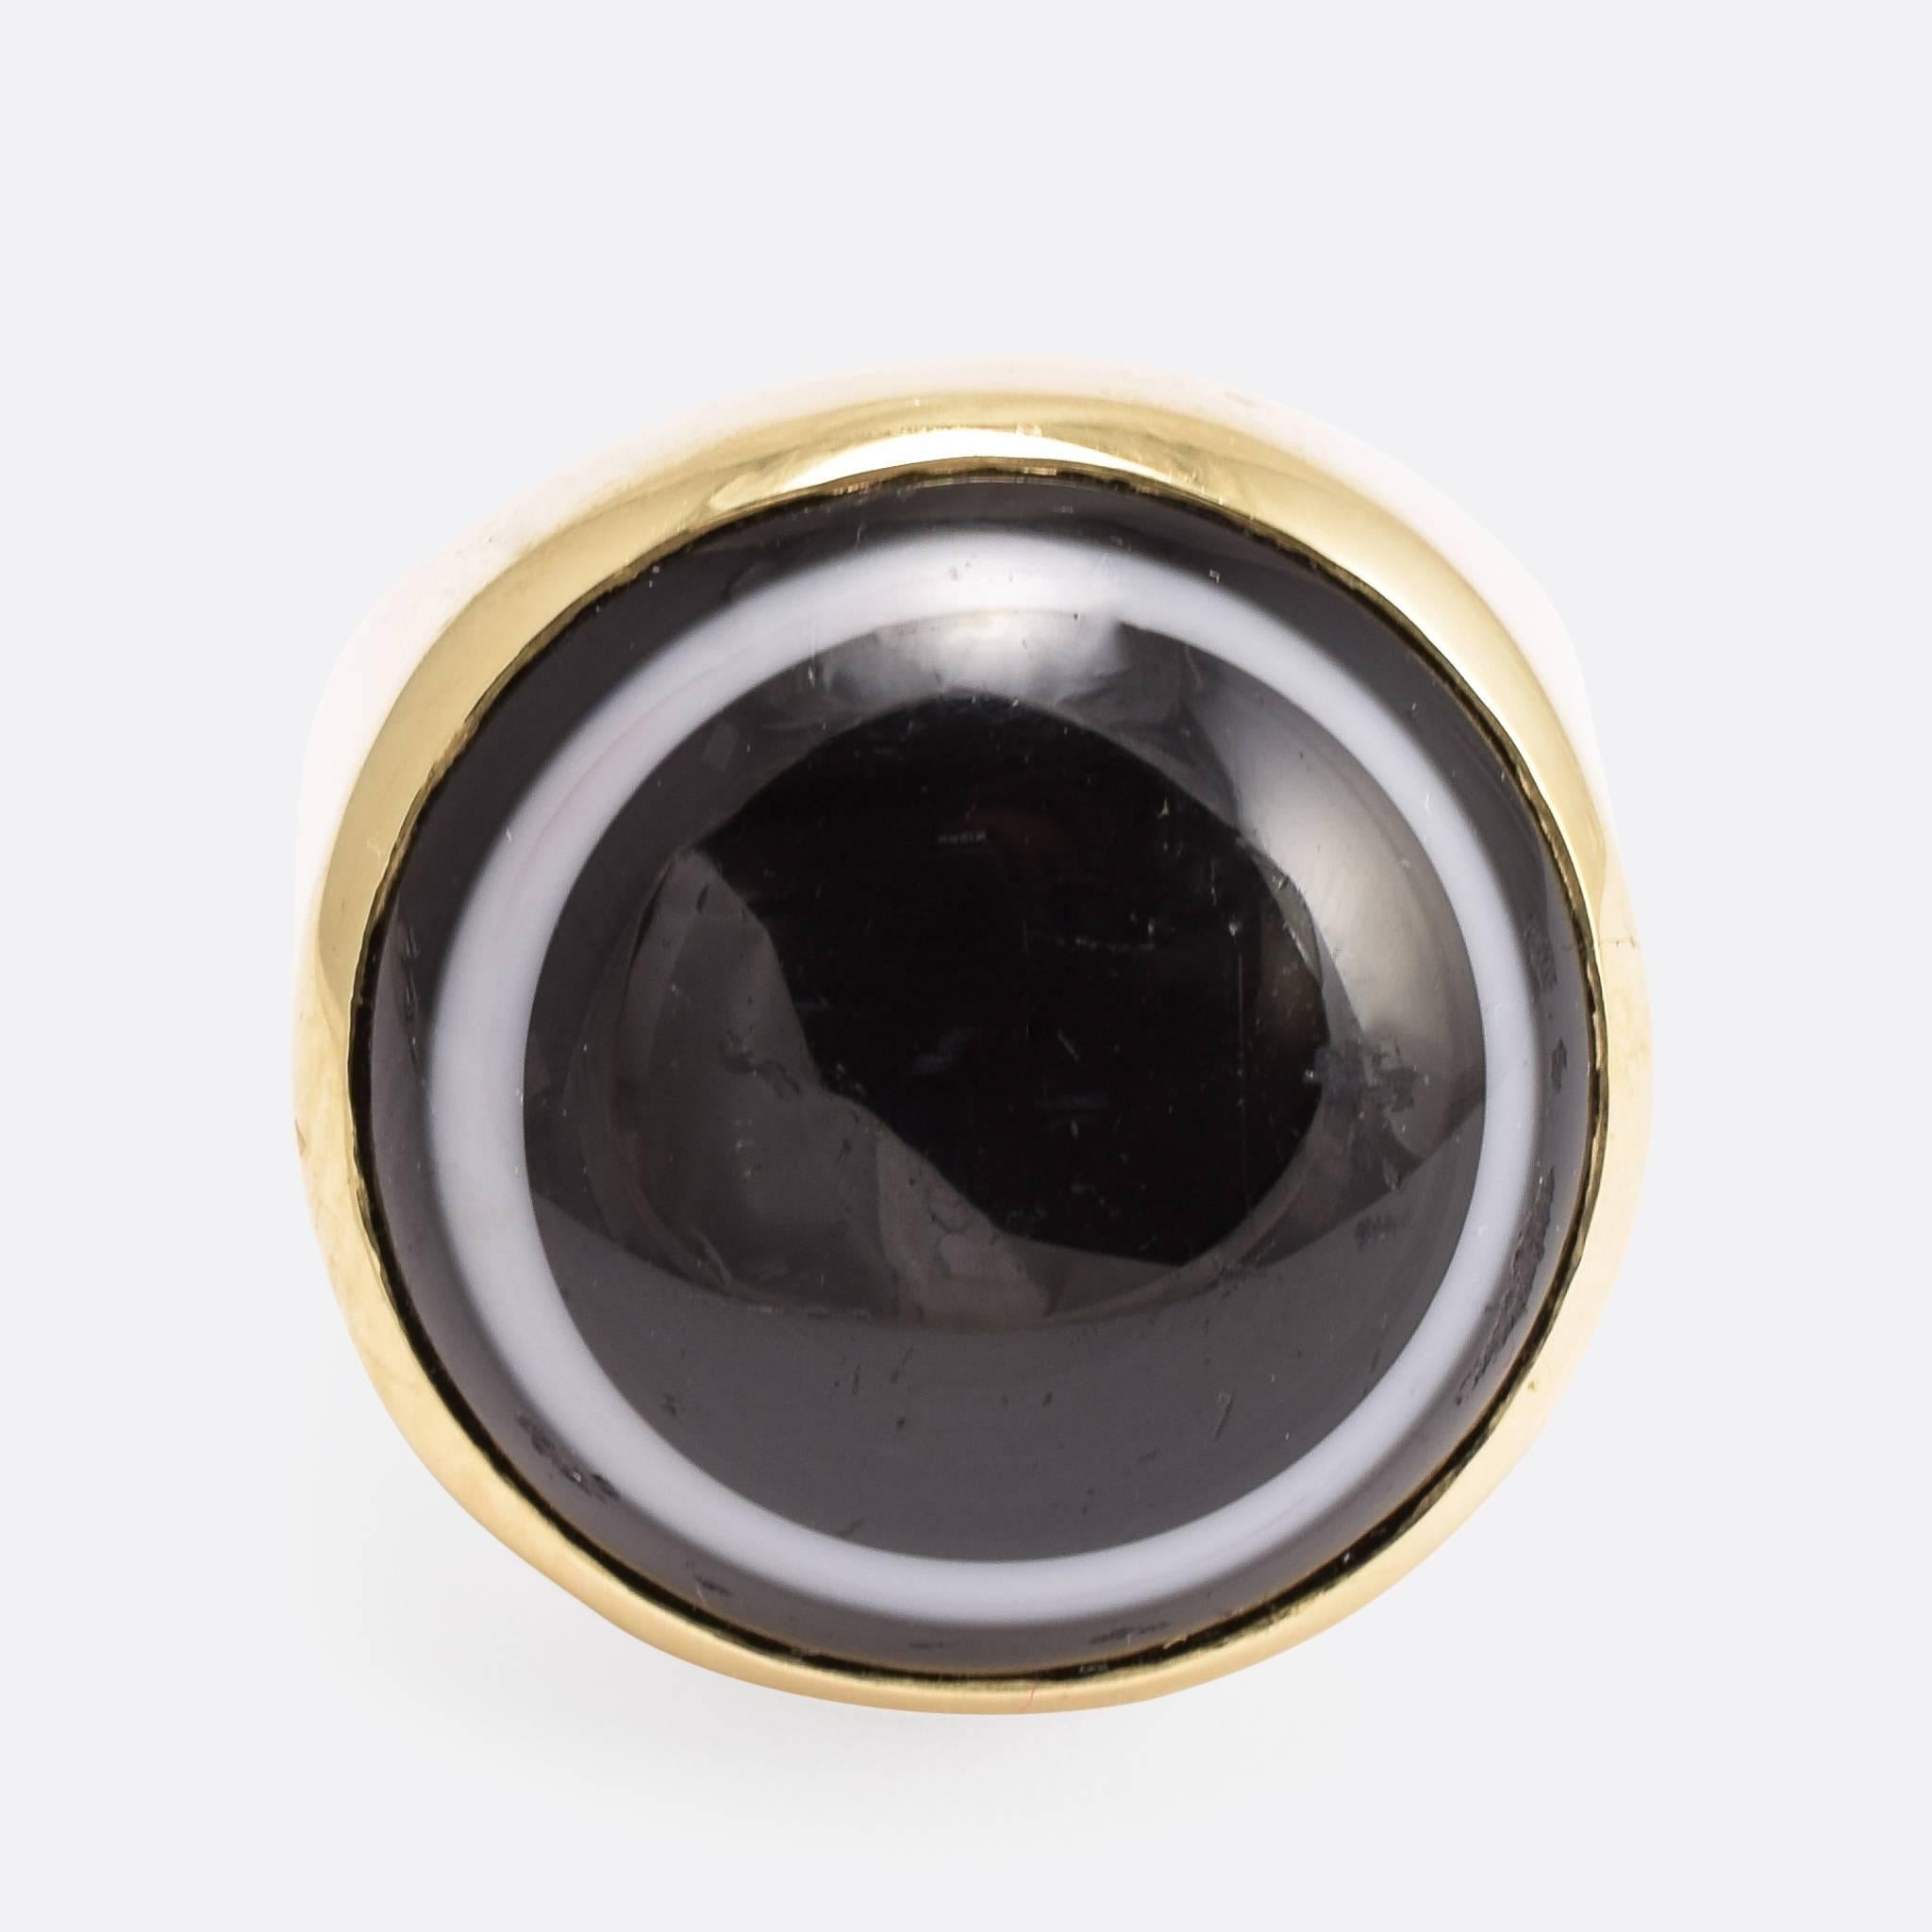 This fabulous vintage ring is set with an oversized banded agate cabochon, cut such that the white band forms a halo surrounded by black. The simple gold ring mount complements the stone perfectly. Ring Size:US: 9, or UK: R 3/4. Banded Agate: 2.0cm